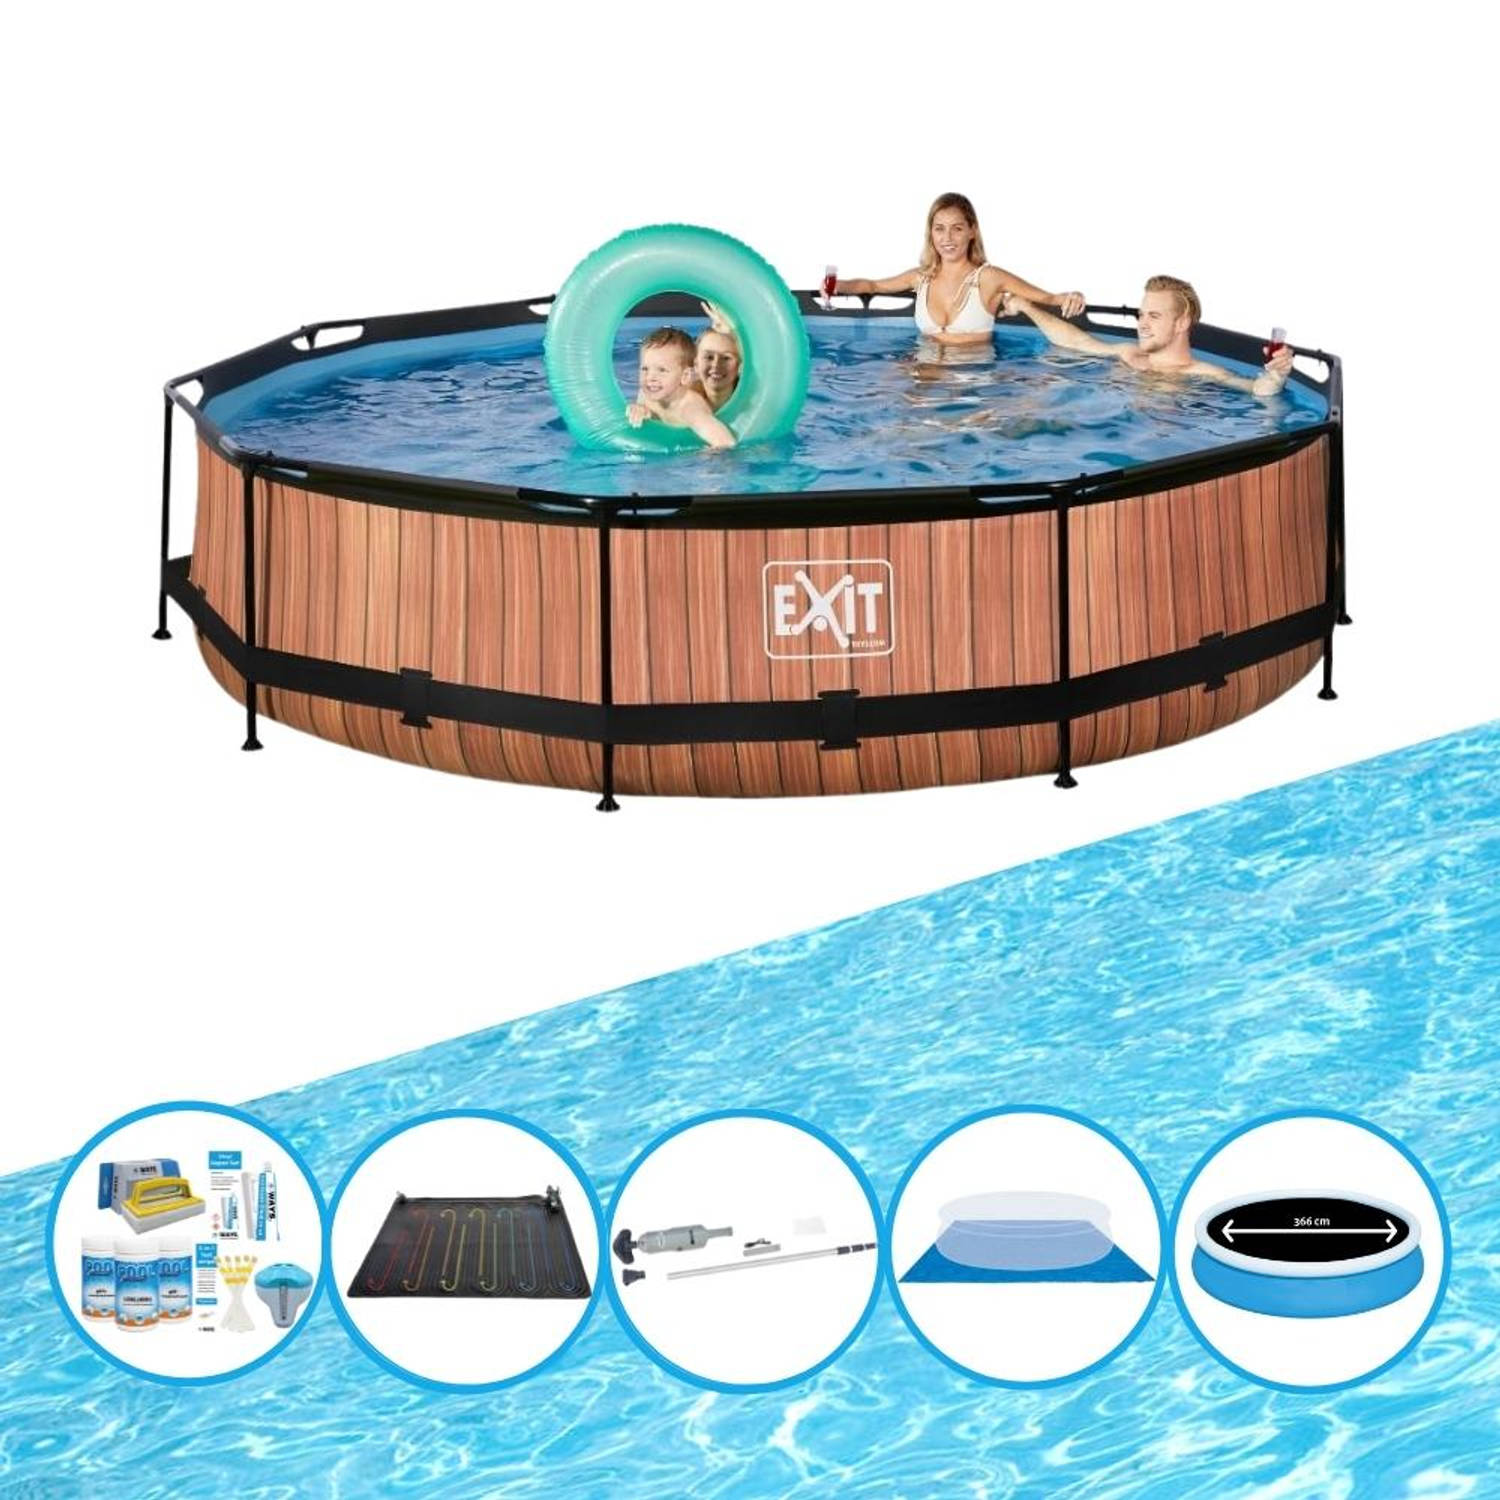 EXIT Toys Exit Zwembad Timber Style - Frame Pool ø360x76cm - Zwembad Combi Deal - Bruin